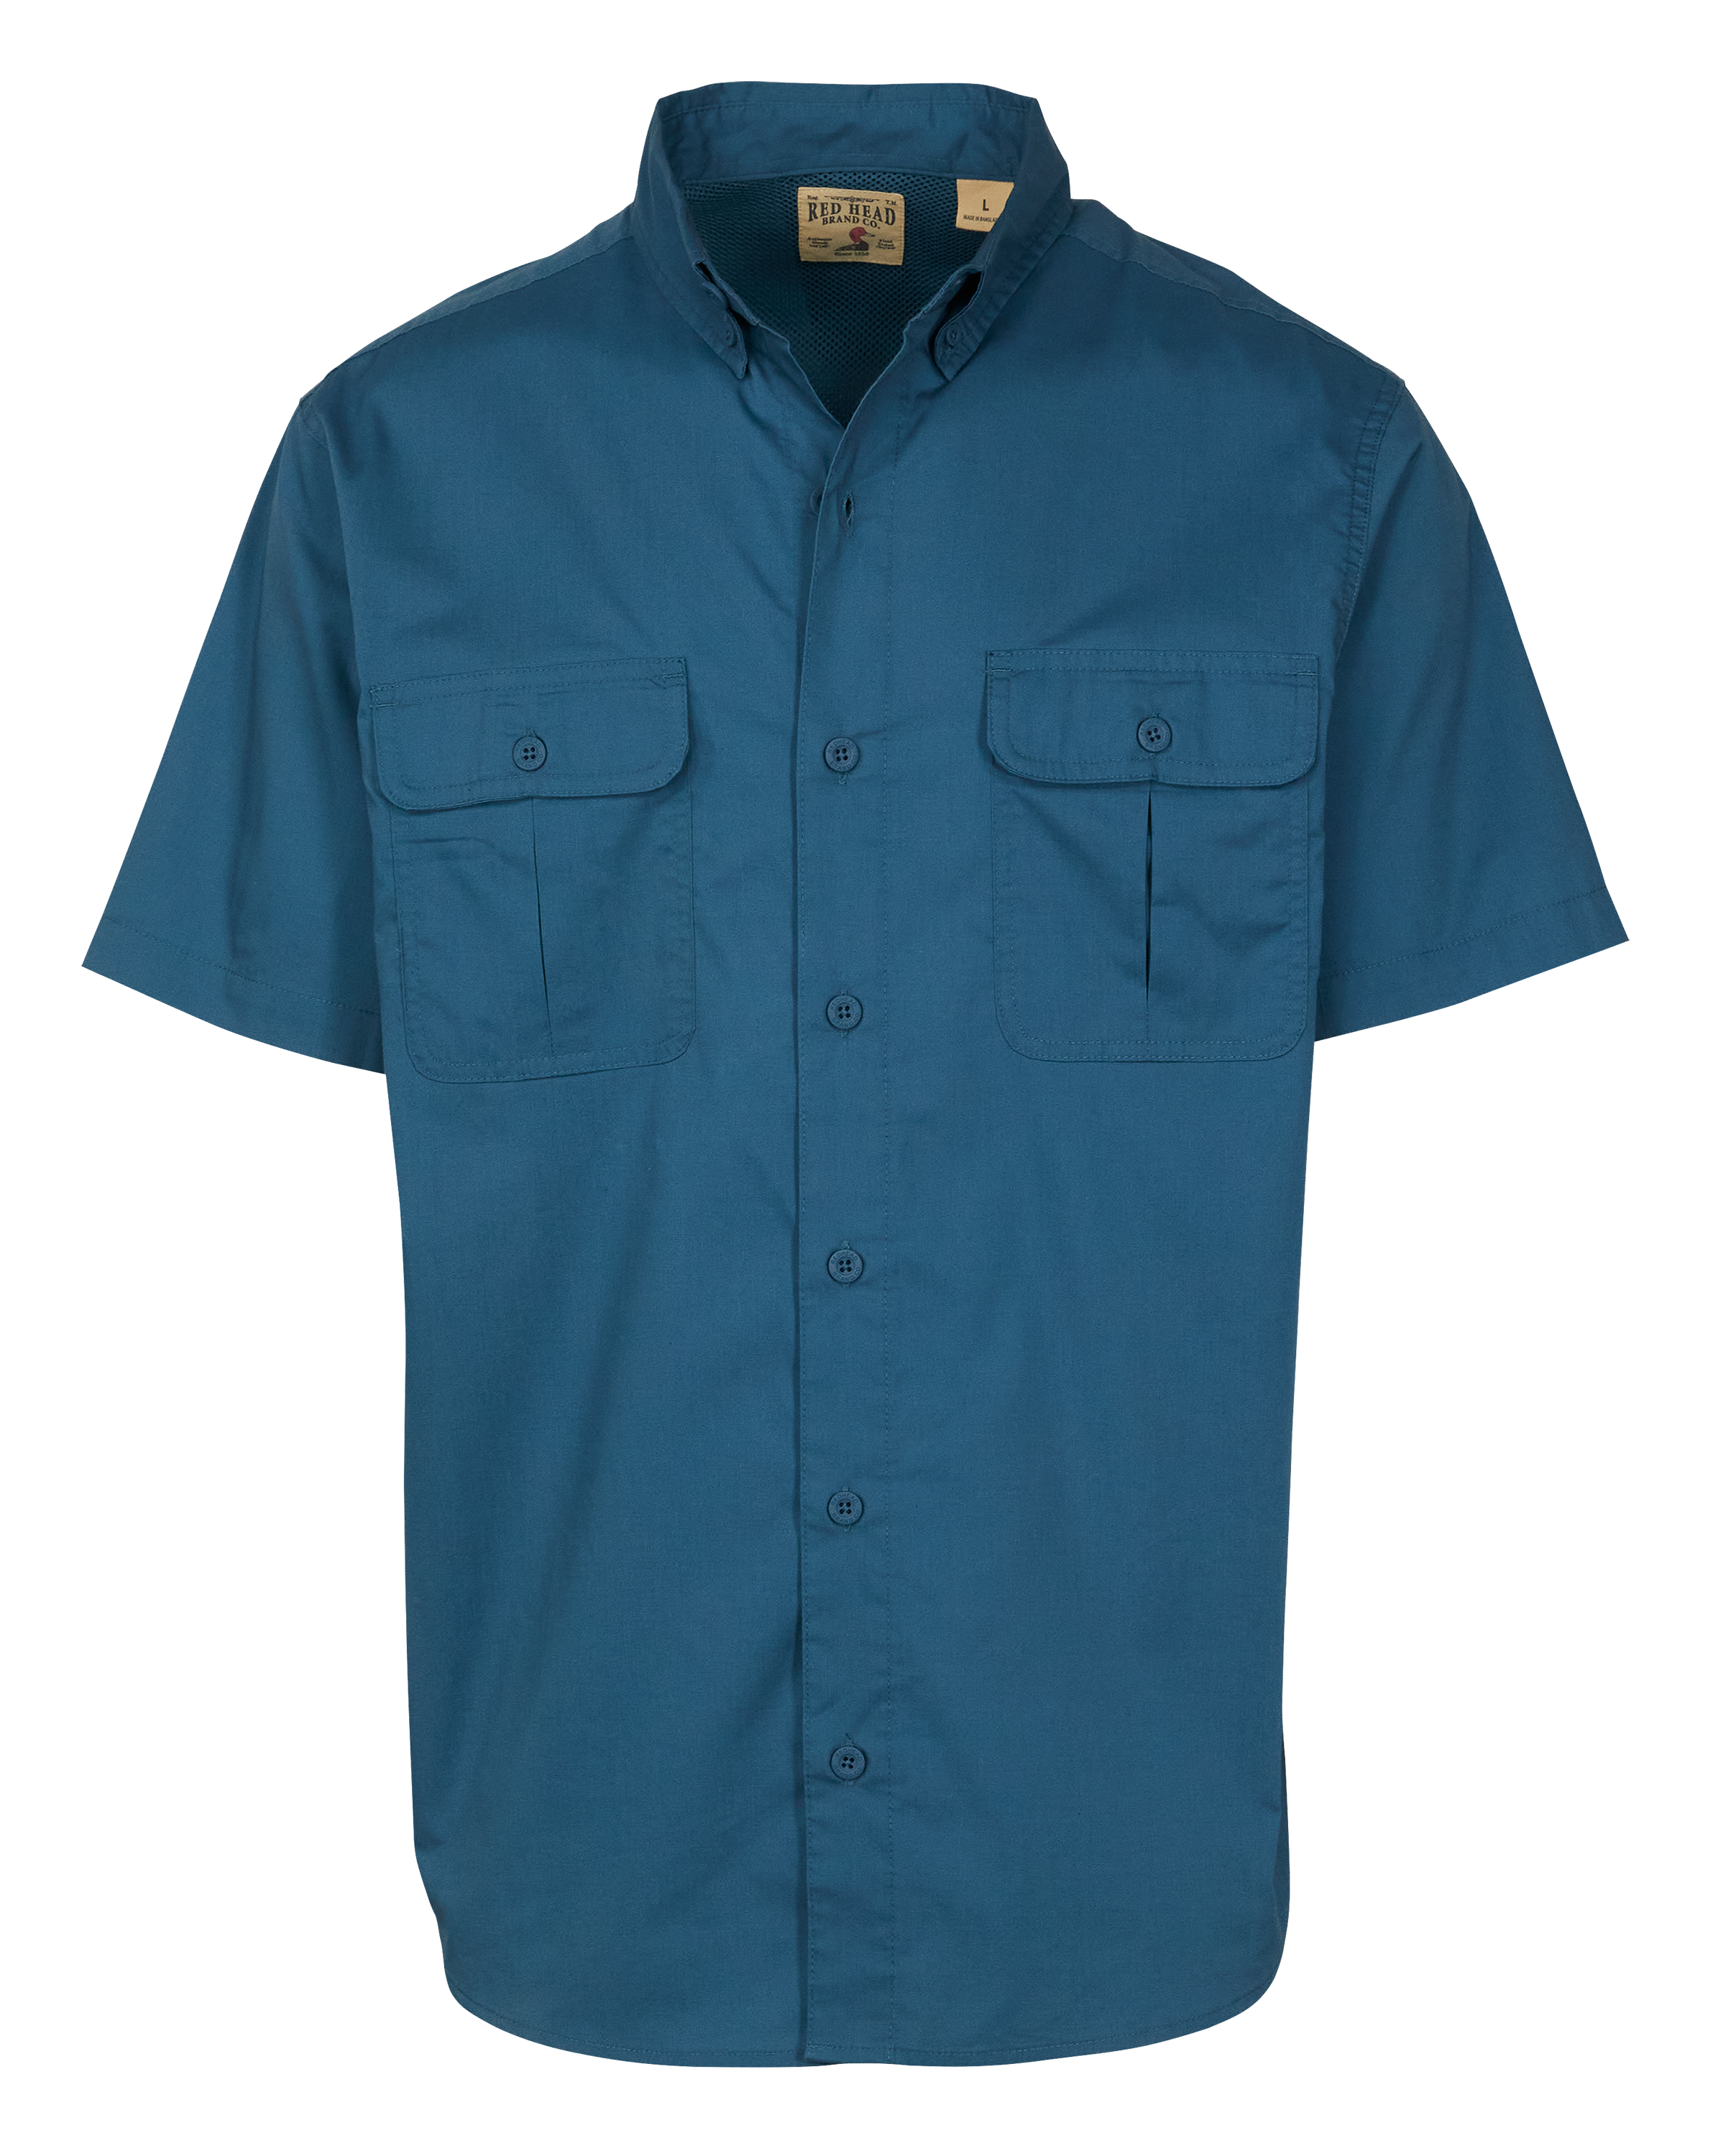 Redhead Spring River Vented Back Solid Button-Down Short-Sleeve Shirt for Men - Cashew - 3XL